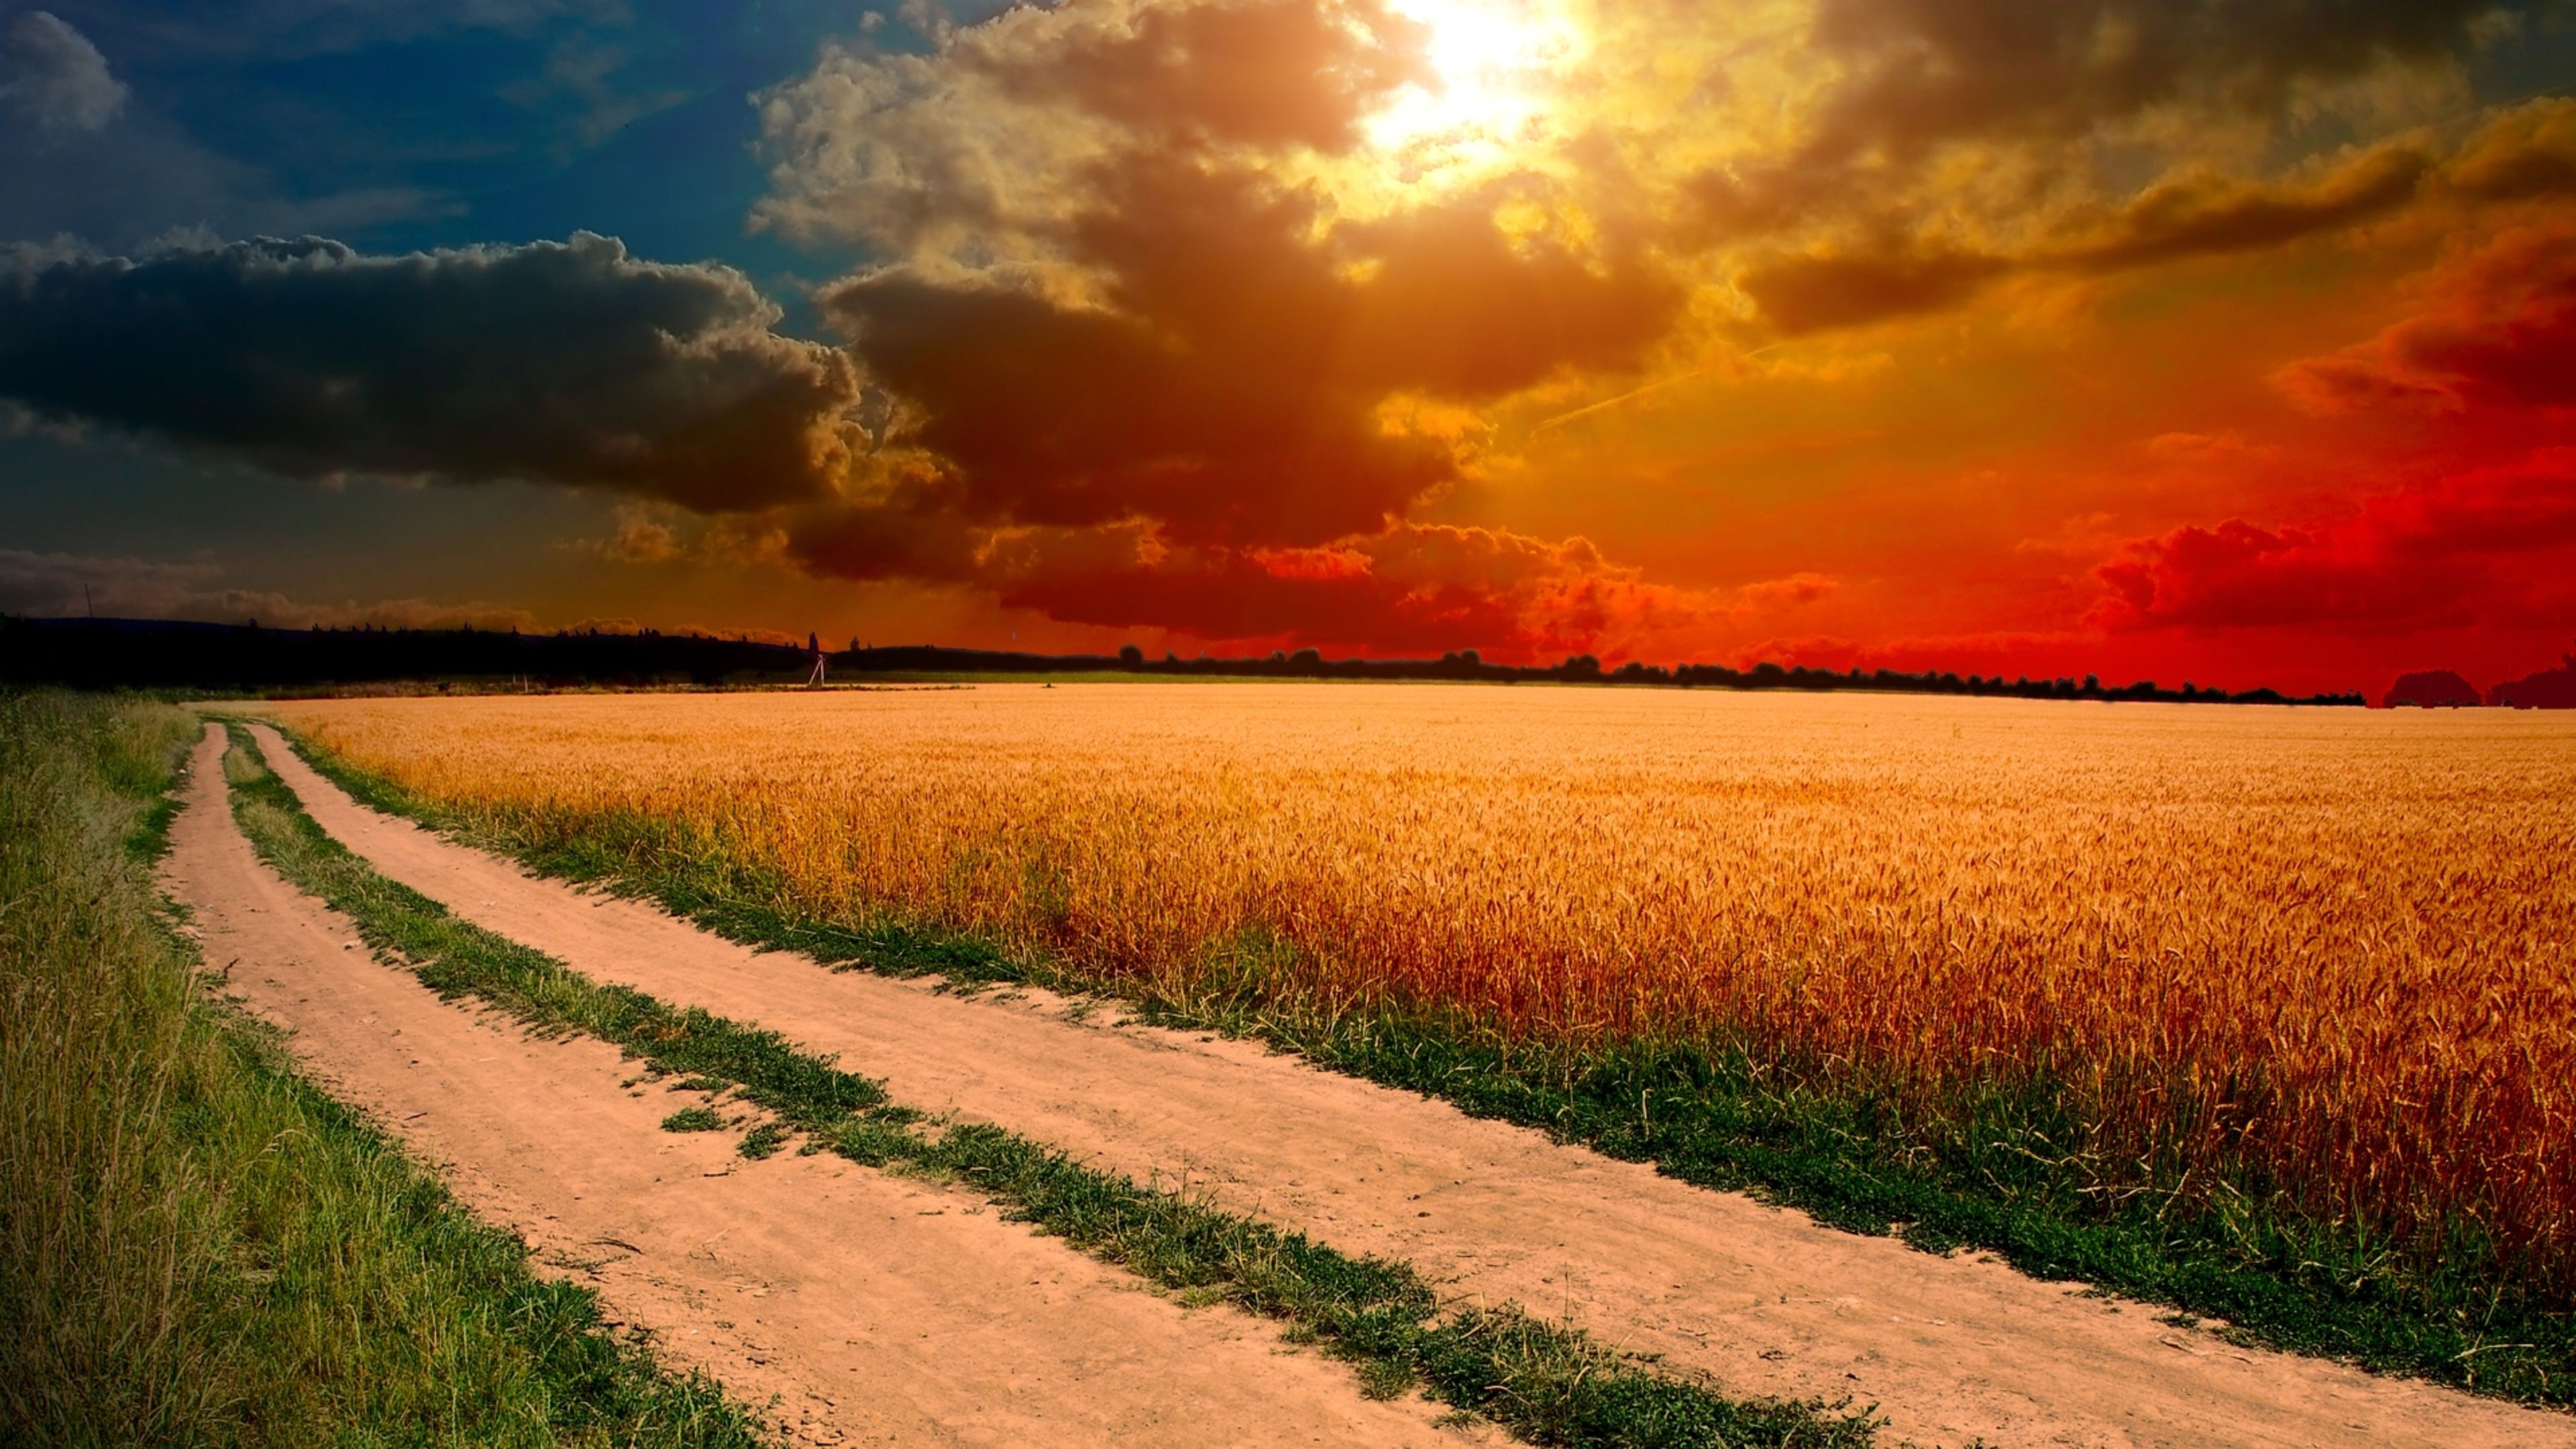 Village Road Field With Mature Wheat Horizon Sunset Sky With Dark Red Clouds HD Wallpaper Free Download 3840x2160, Wallpaper13.com